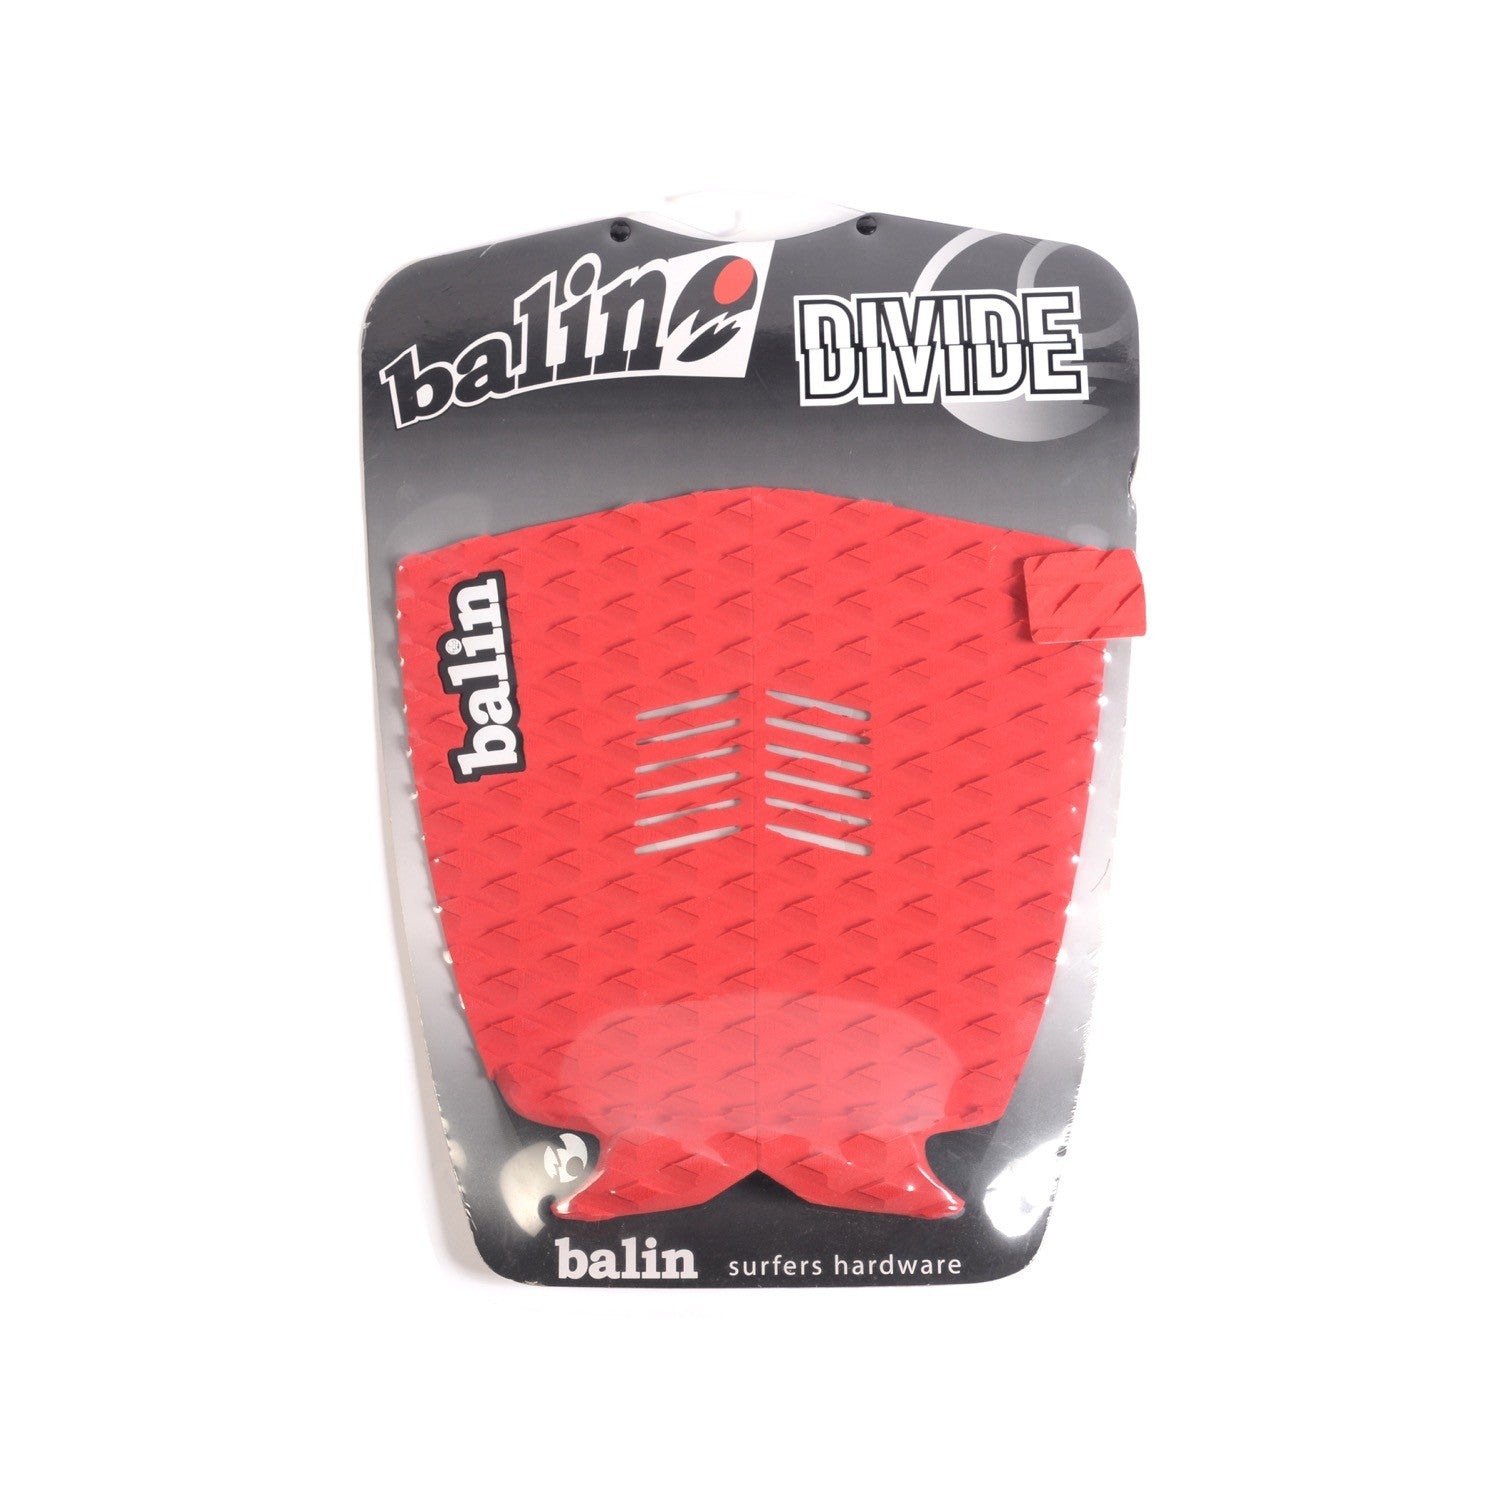 BALIN - Divide Traction Pad Surf - Red